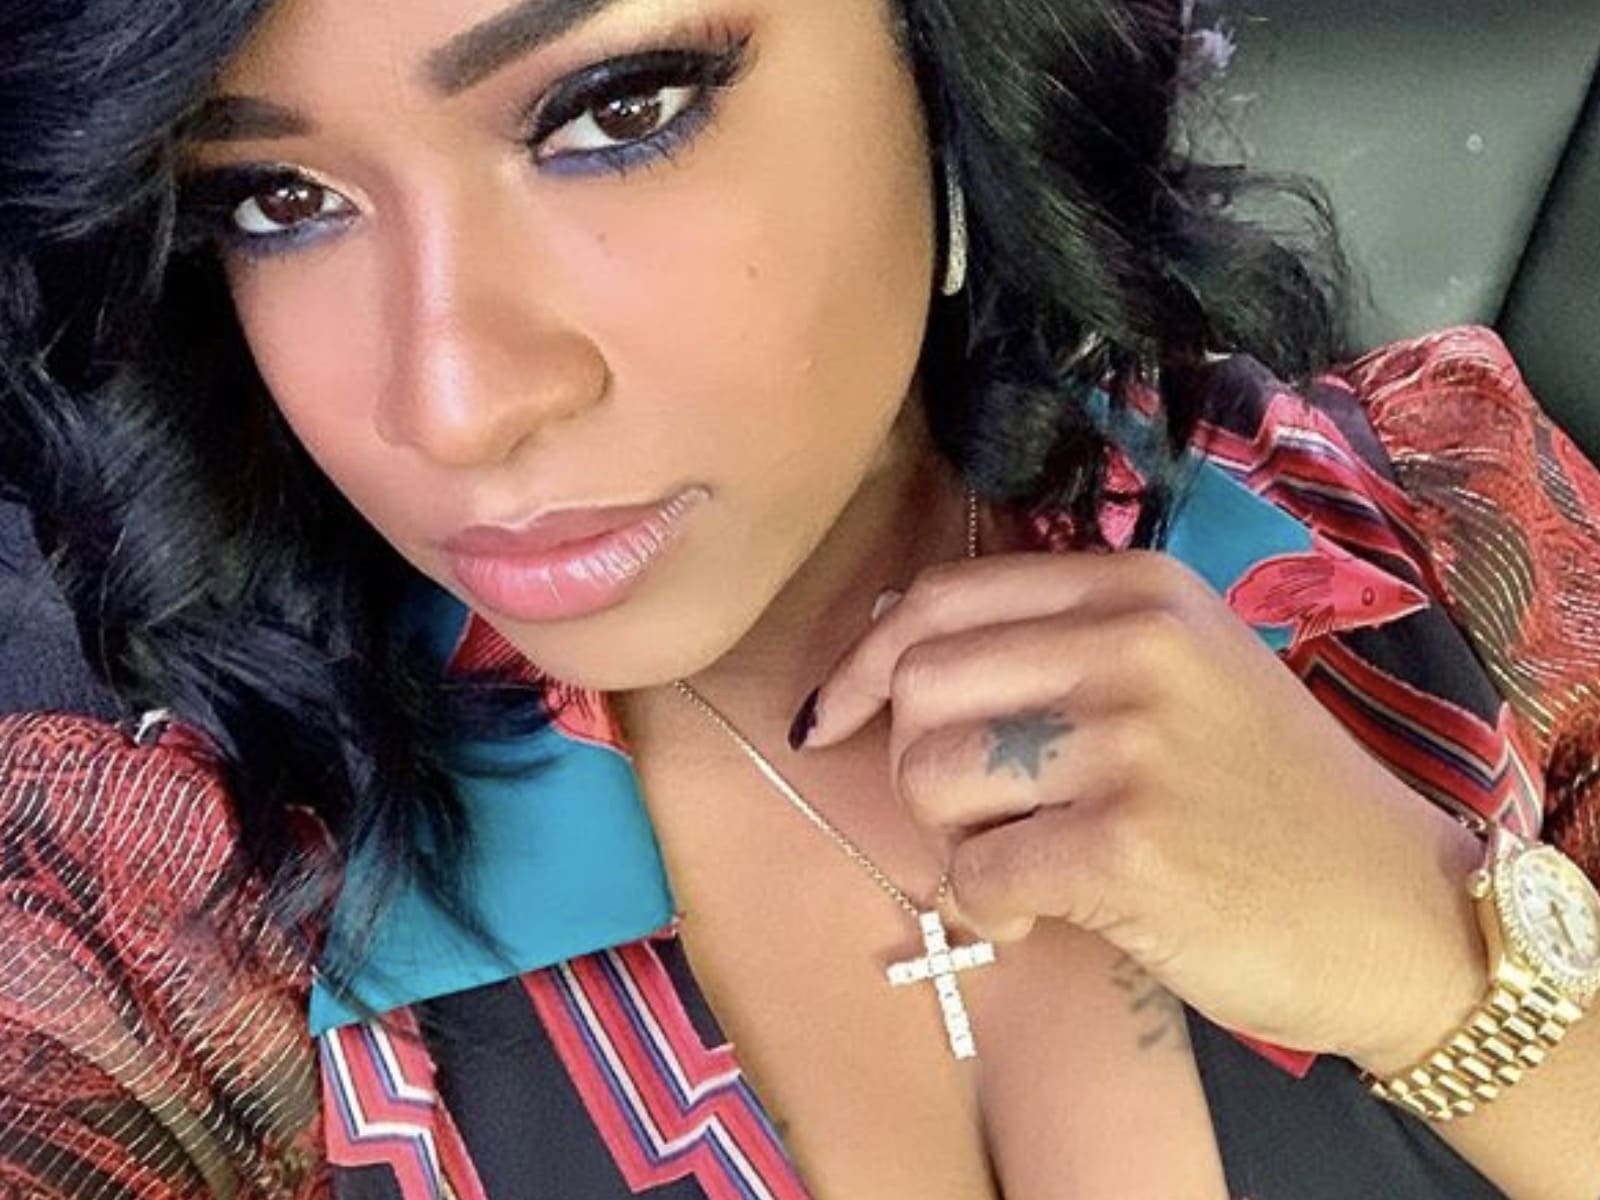 Toya Johnson Has A Relaxing Time With Robert Rushing During Their Getaway - See Pics And Videos From Their Vacay